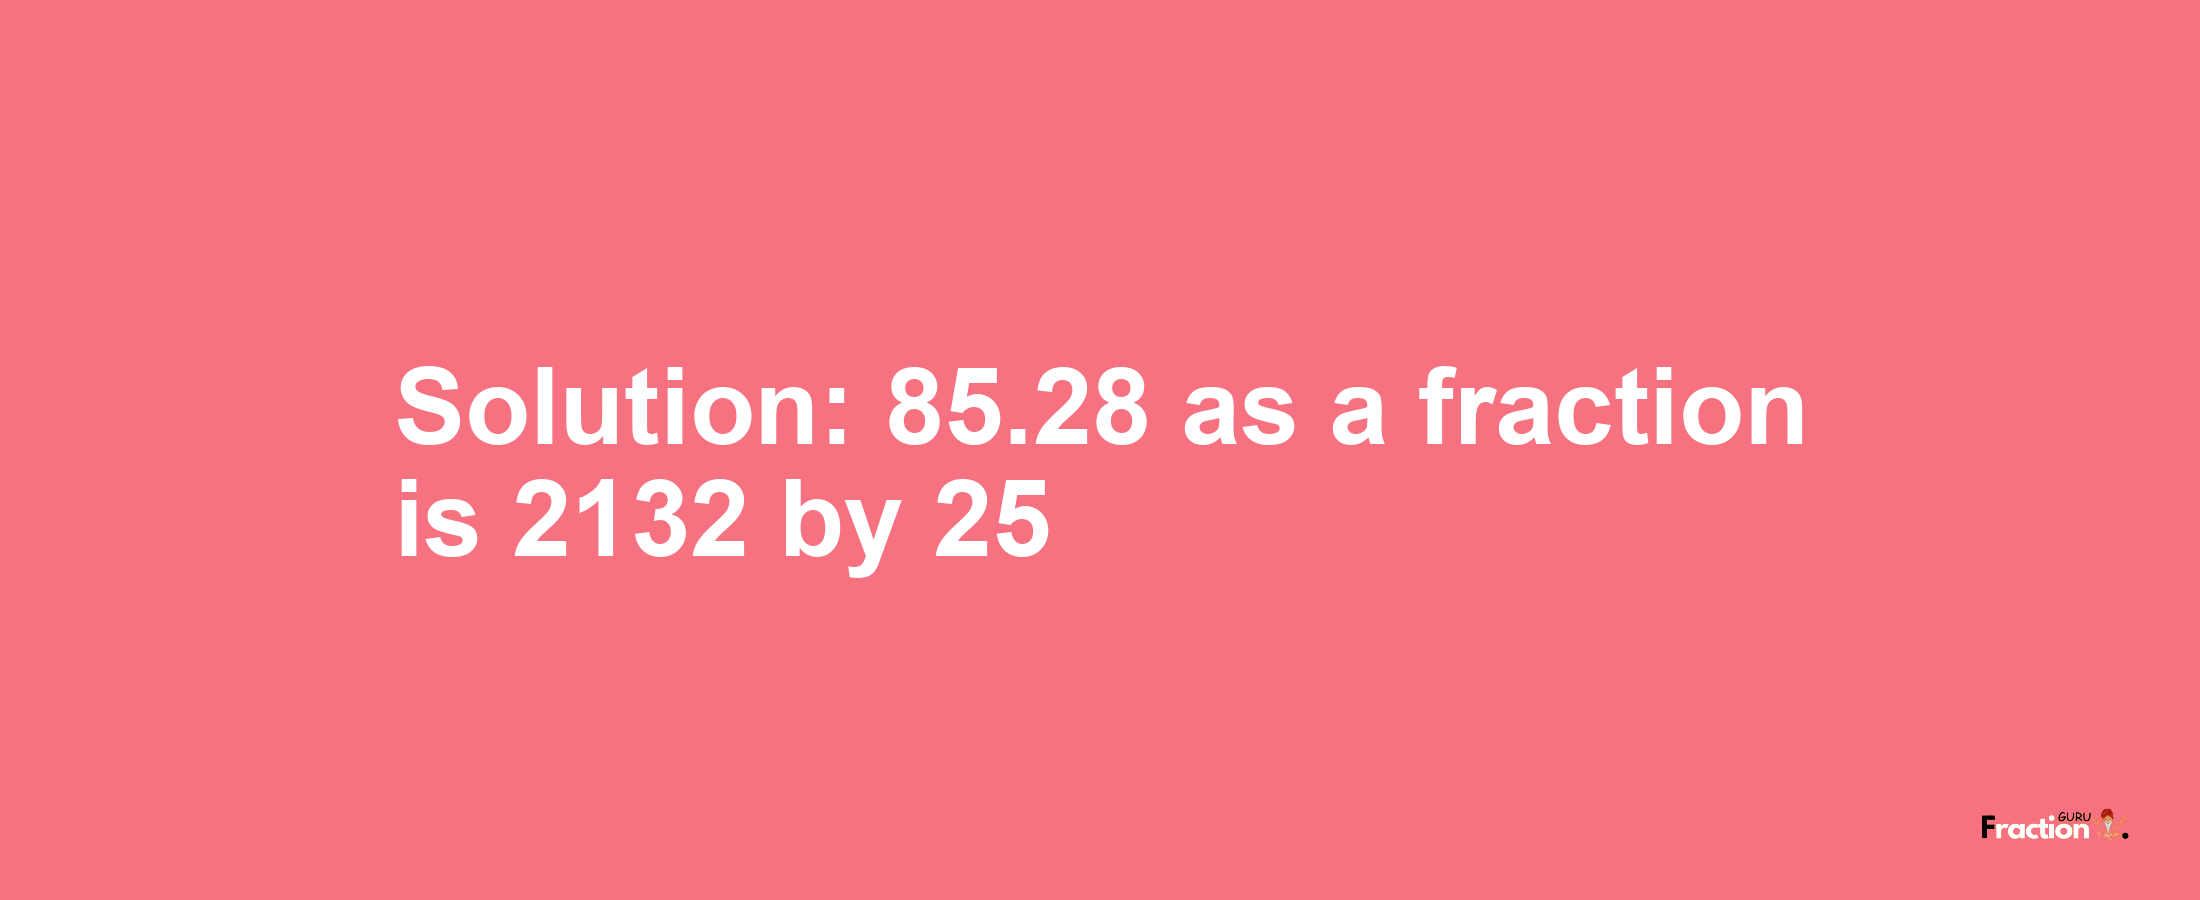 Solution:85.28 as a fraction is 2132/25